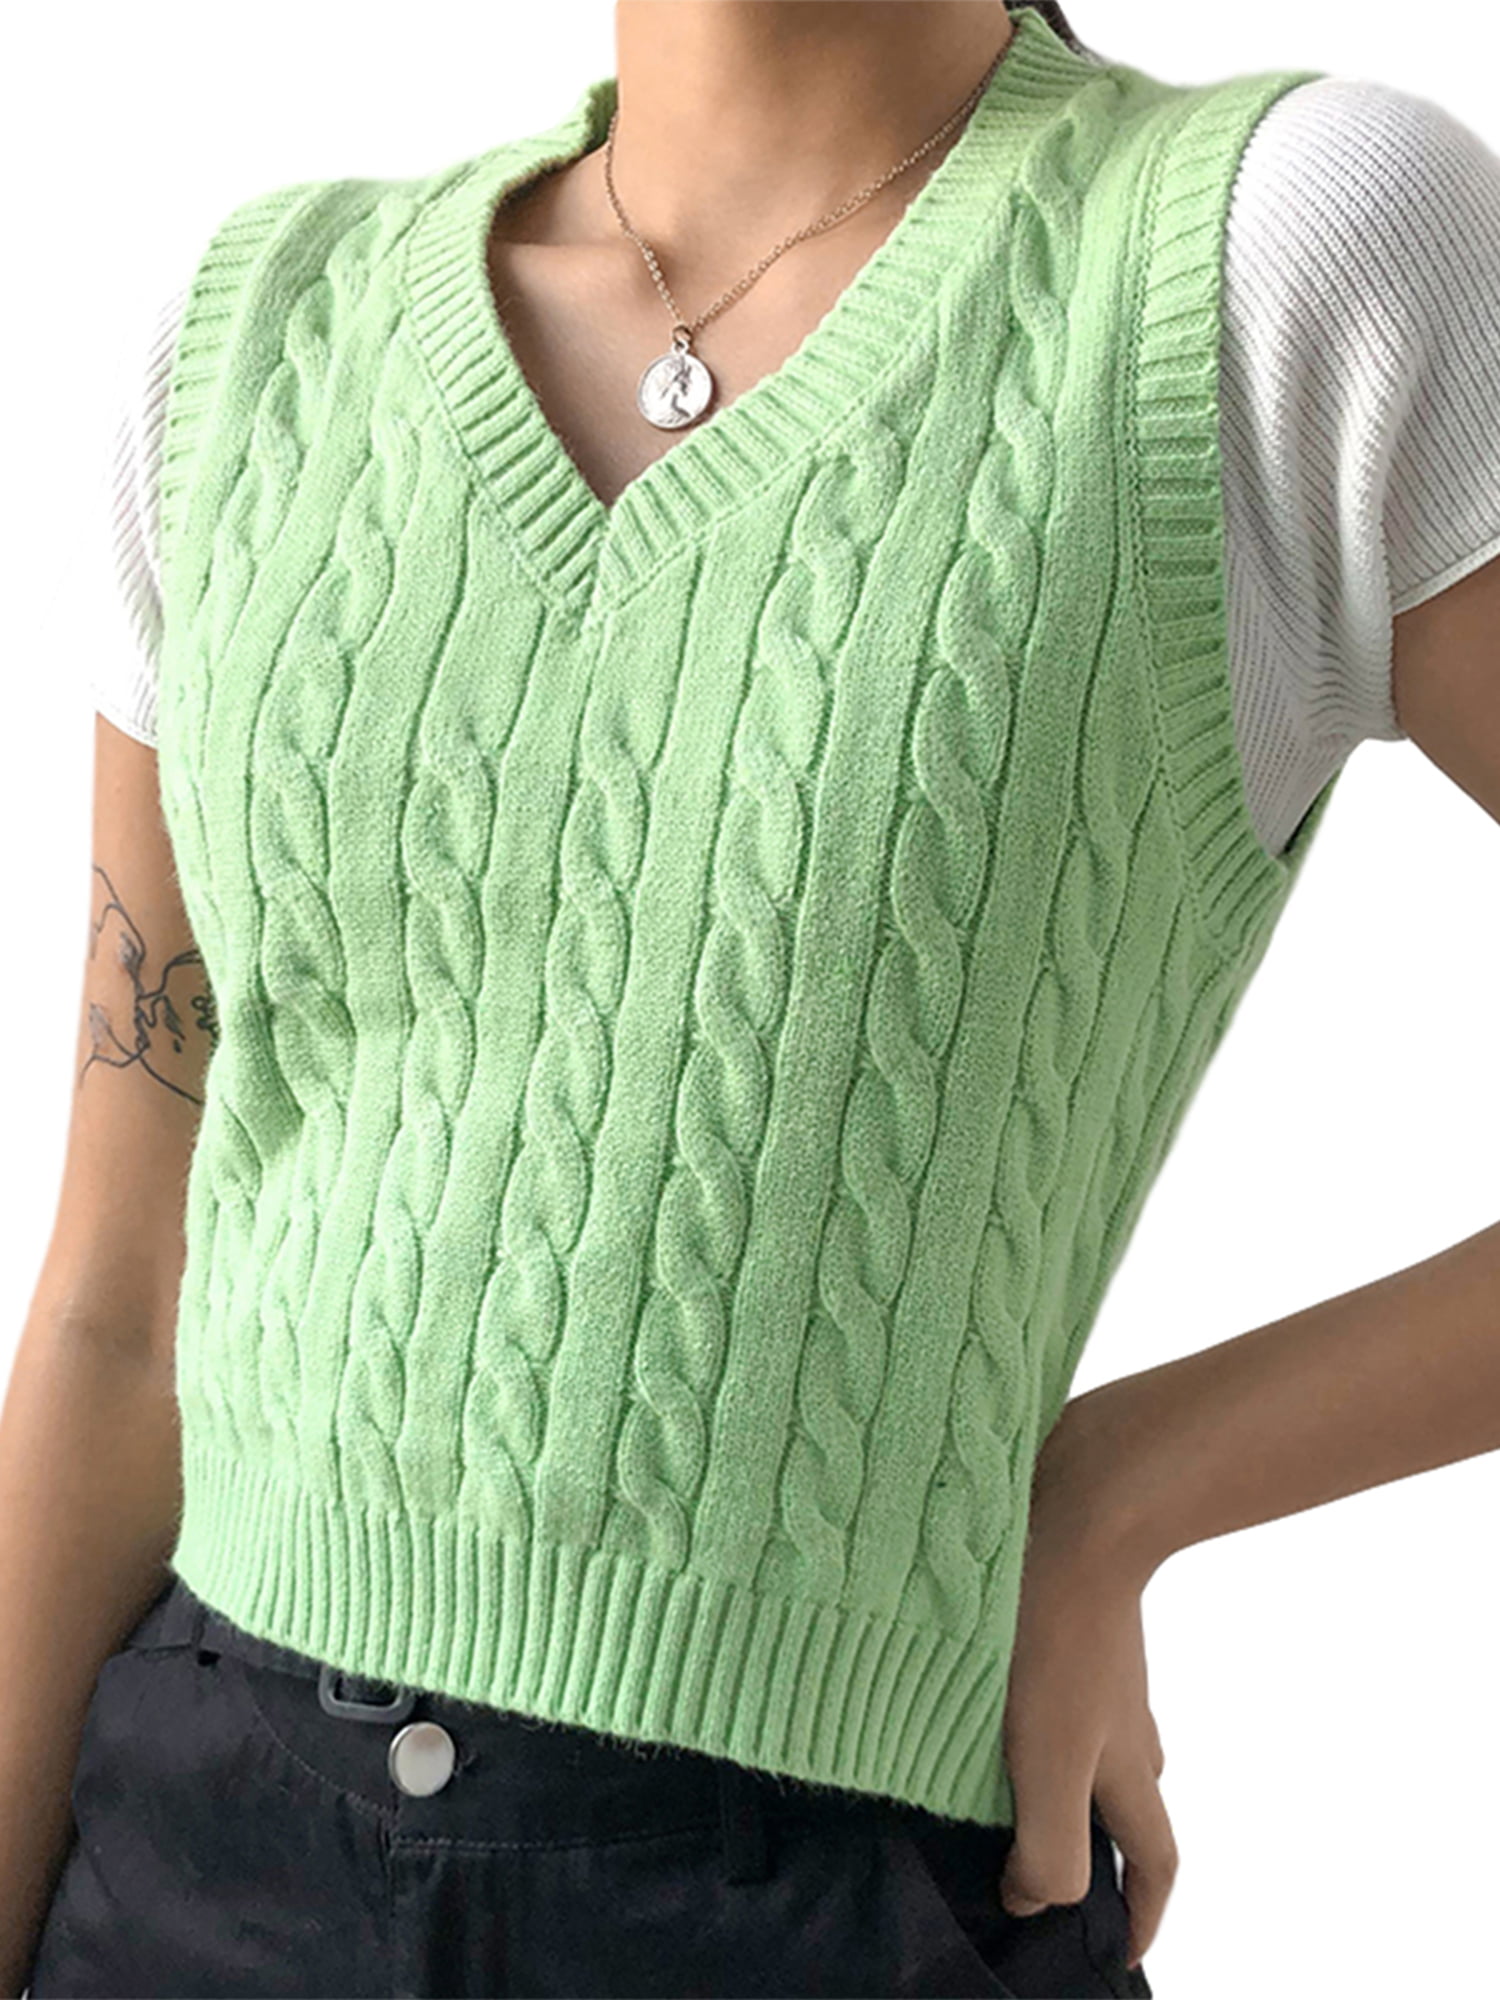 Soulomelody Womens Summer V Neck Tops Knitted Sleeveless Tank Top Cable  Knit Sweater Vest Casual Solid Tee Shirts Army Green at  Women's  Clothing store